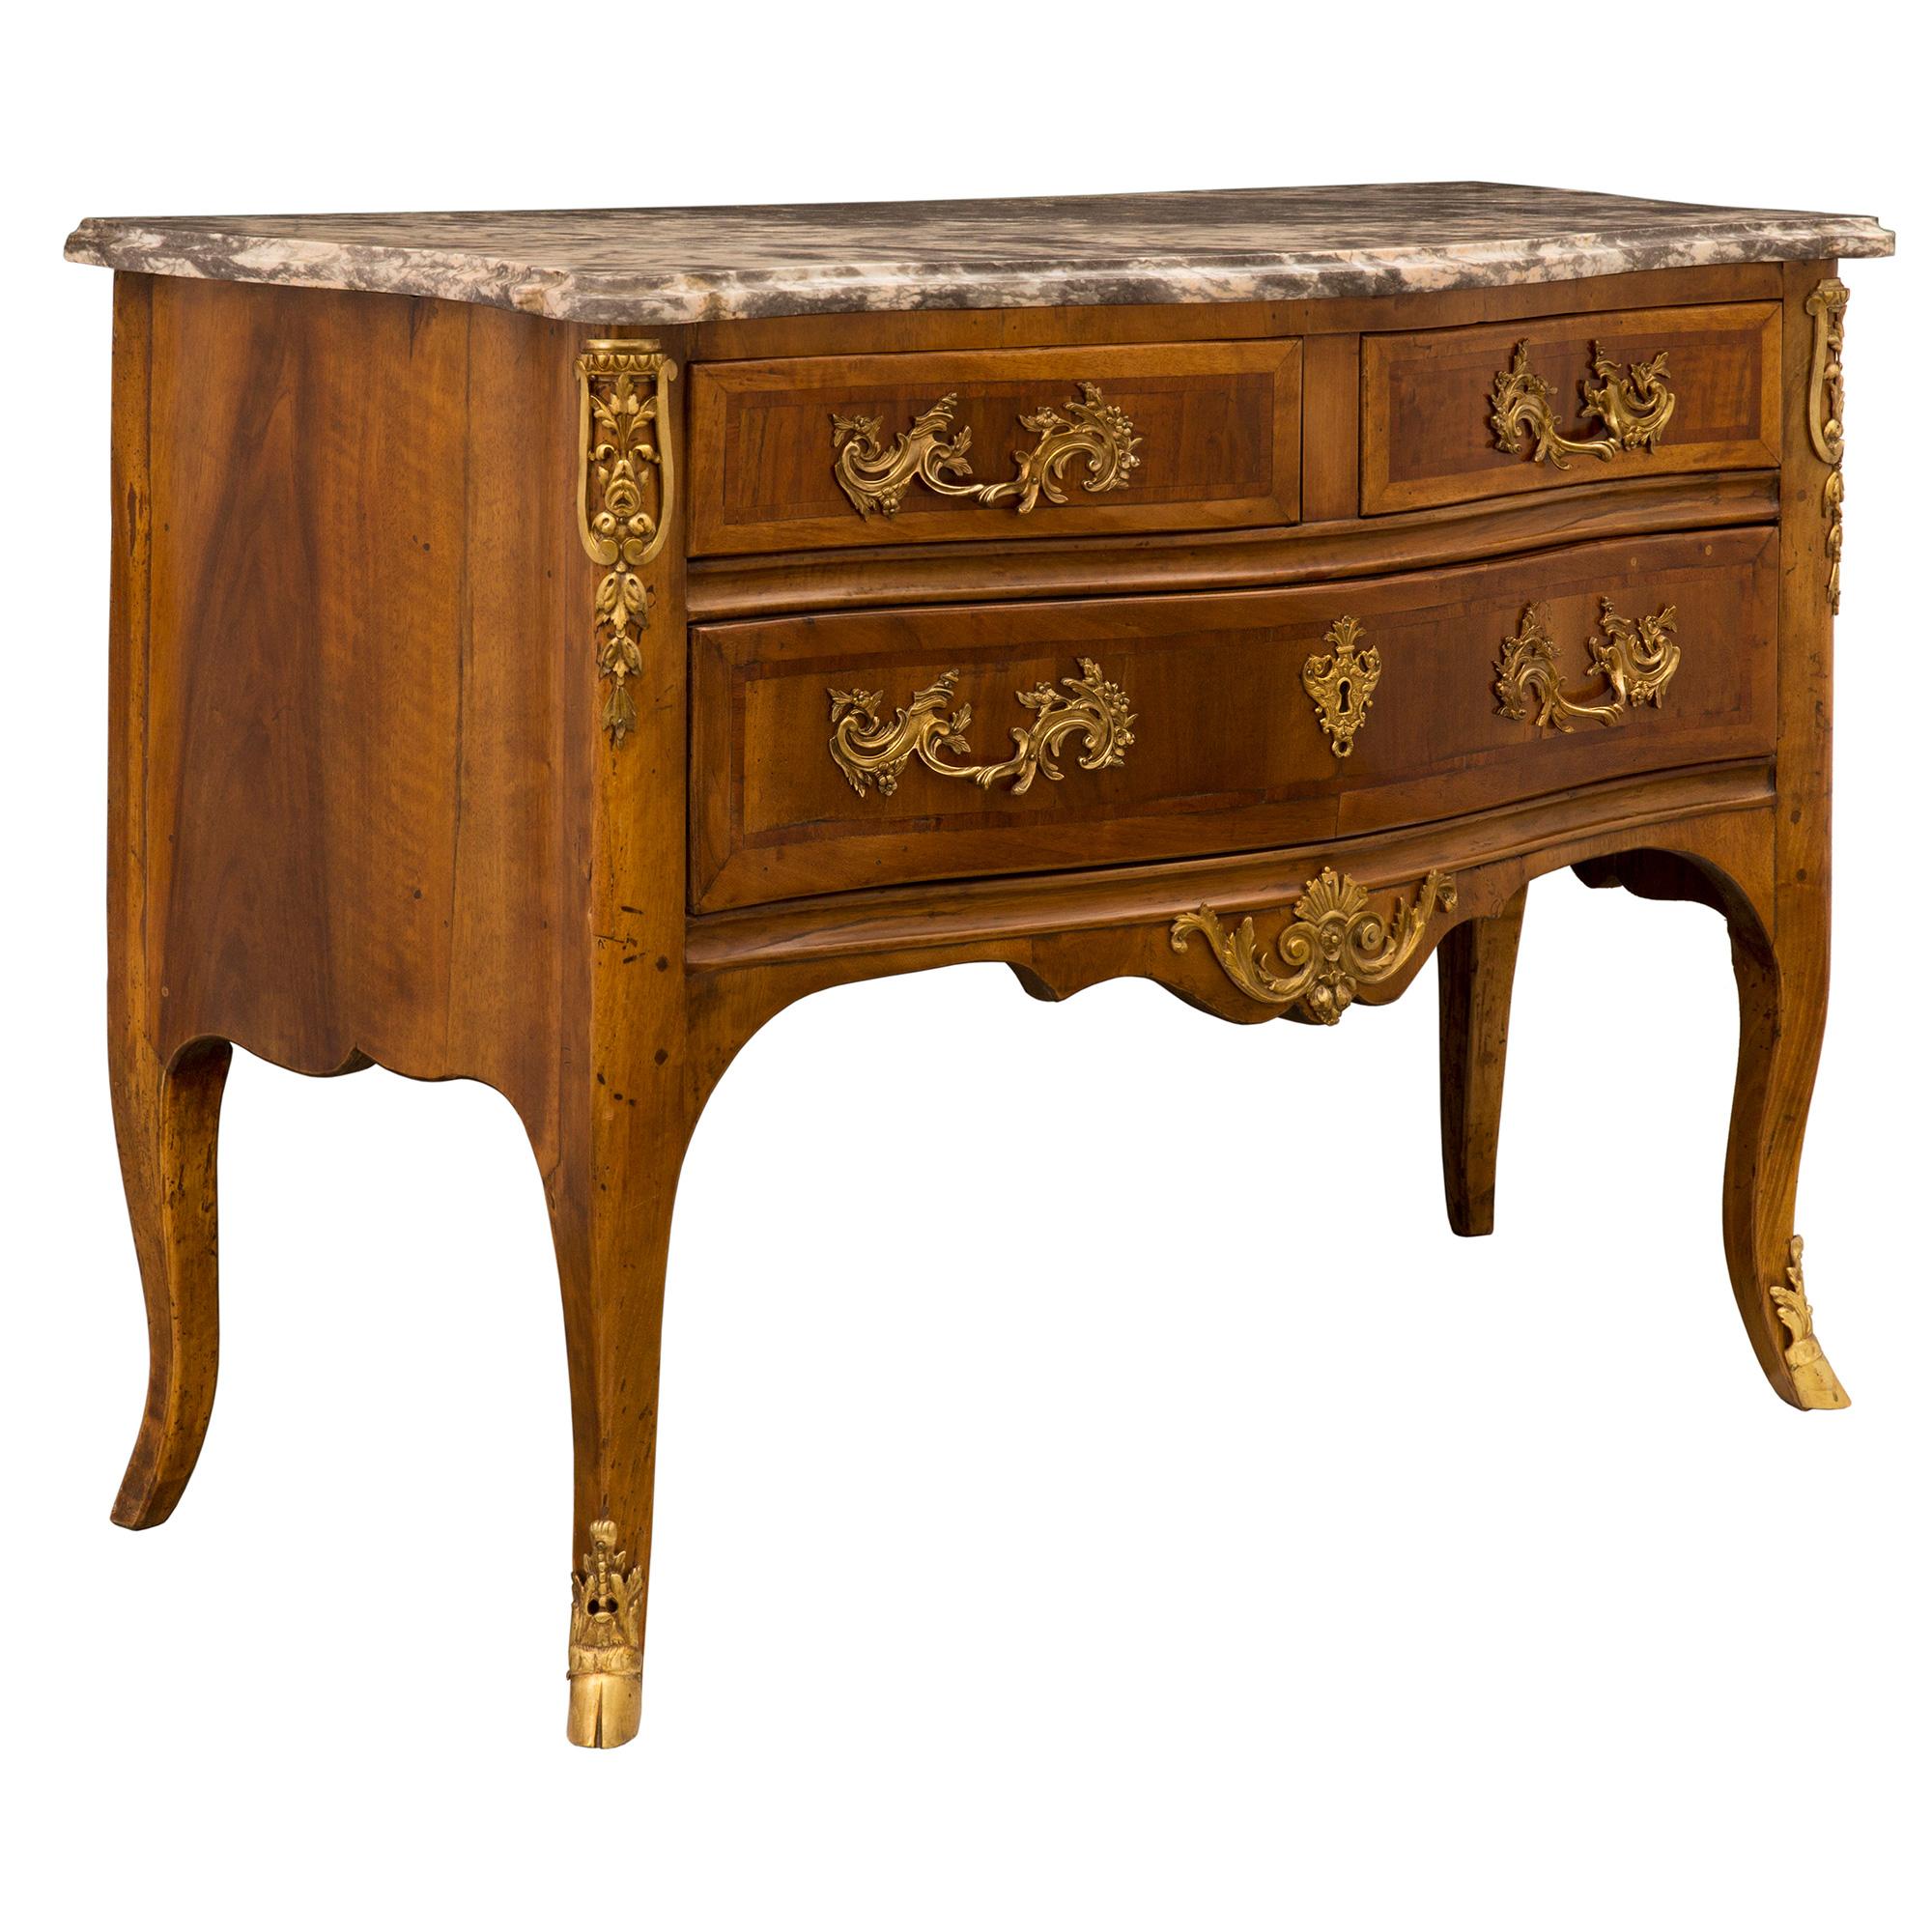 Regency French 18th Century Régence Period Walnut, Fruitwood, Ormolu, and Marble Commode For Sale